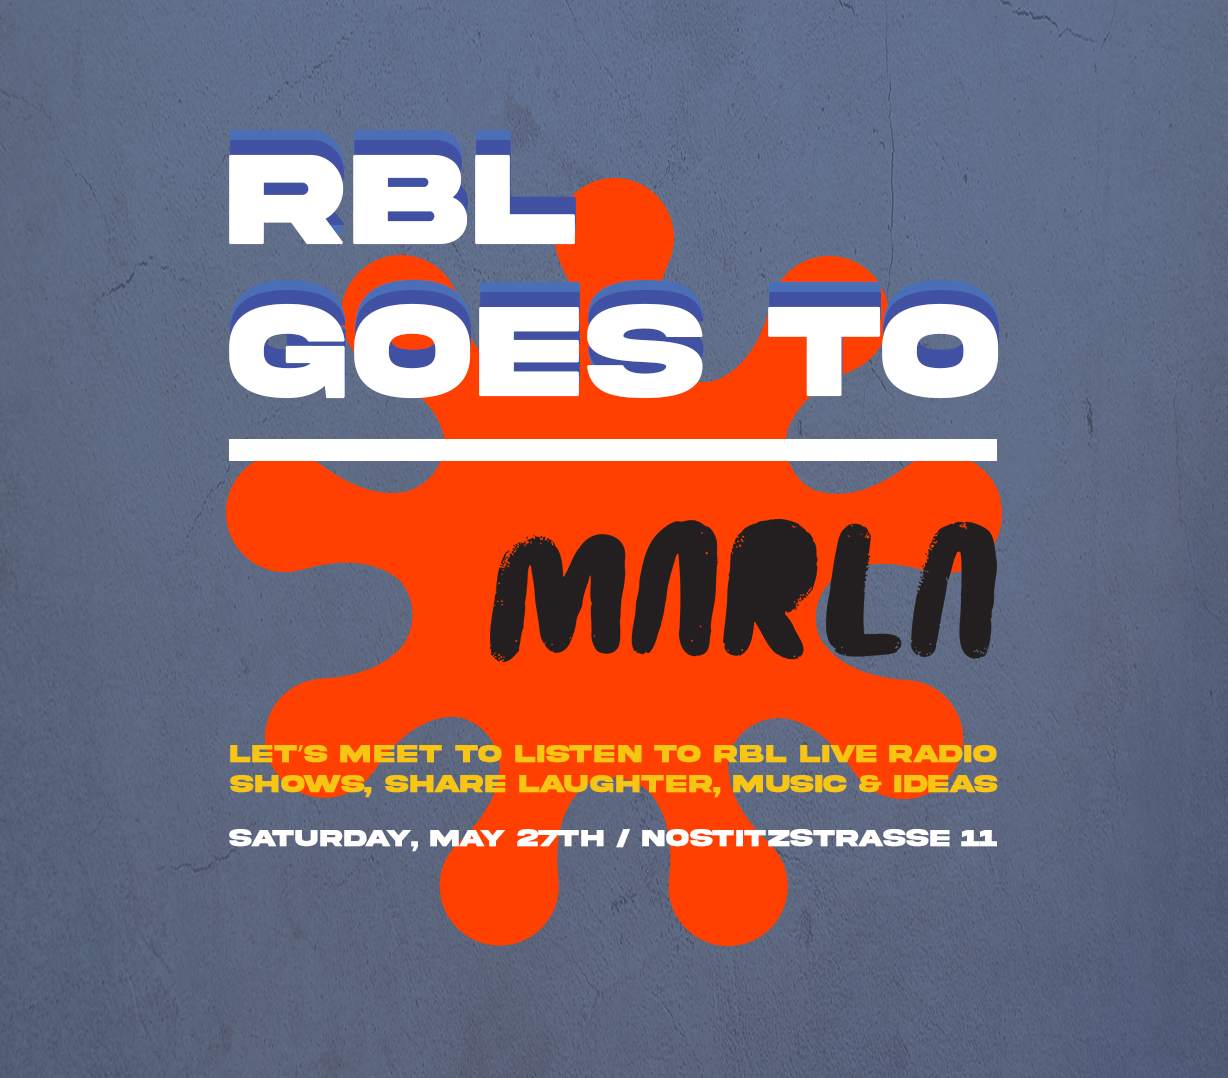 RBL goes to Marla Records - フライヤー表